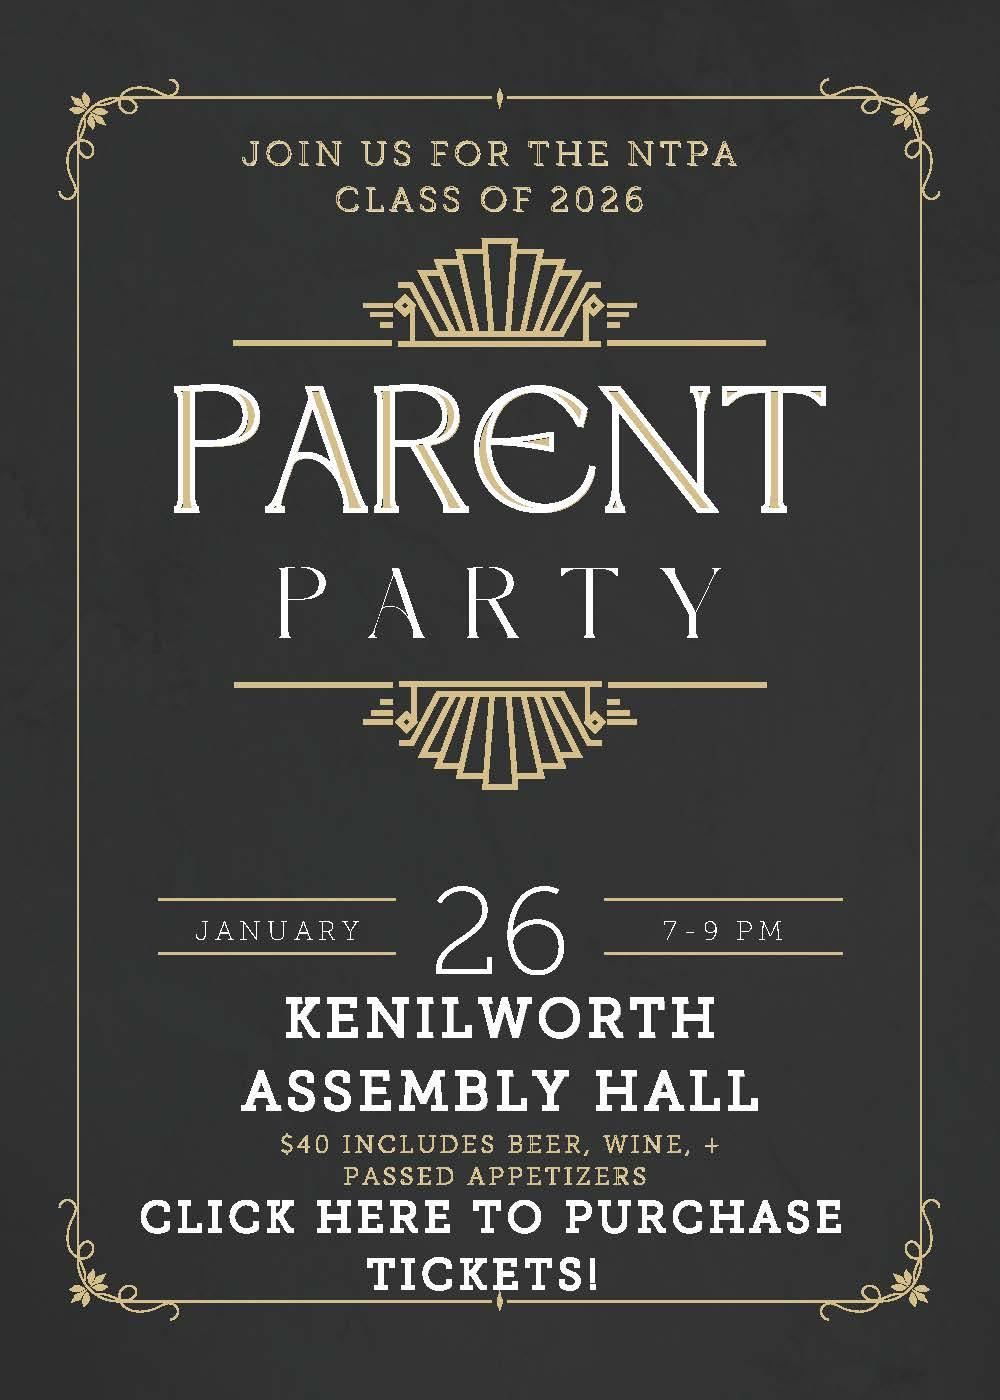  Parent Party Class of 2026 poster